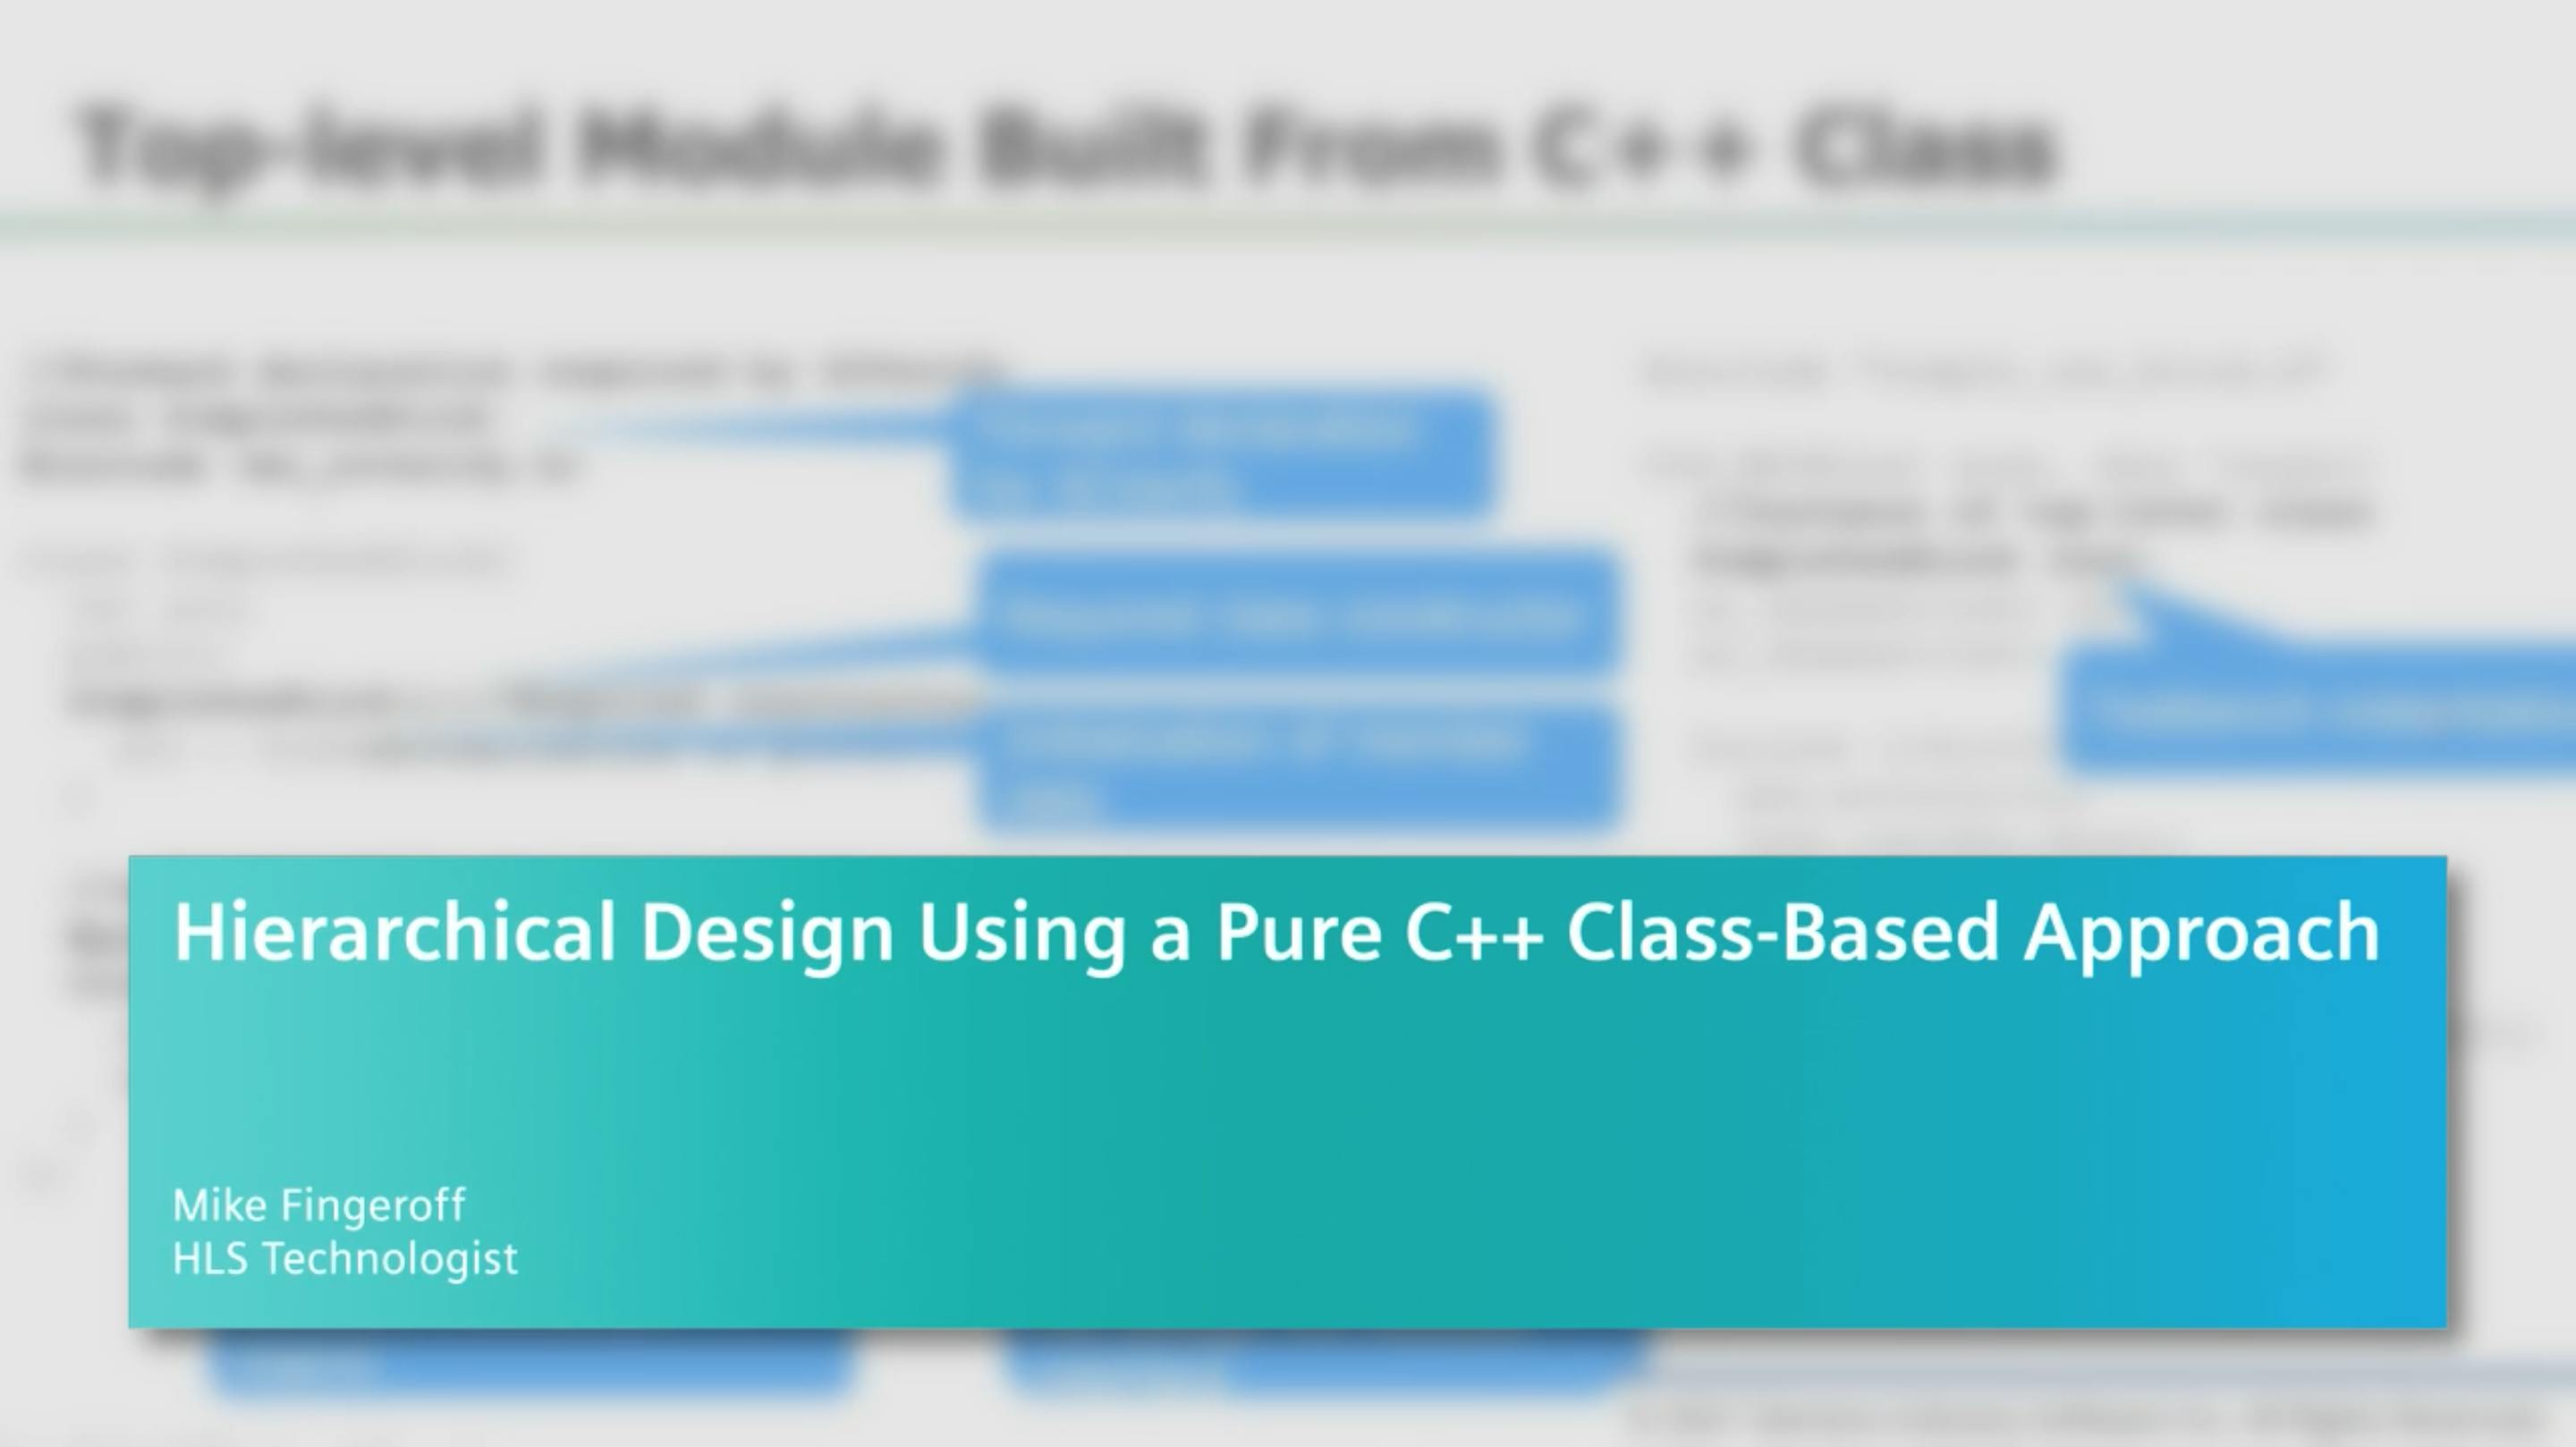 Hierarchical Design Using a Pure C++ Class-Based Approach